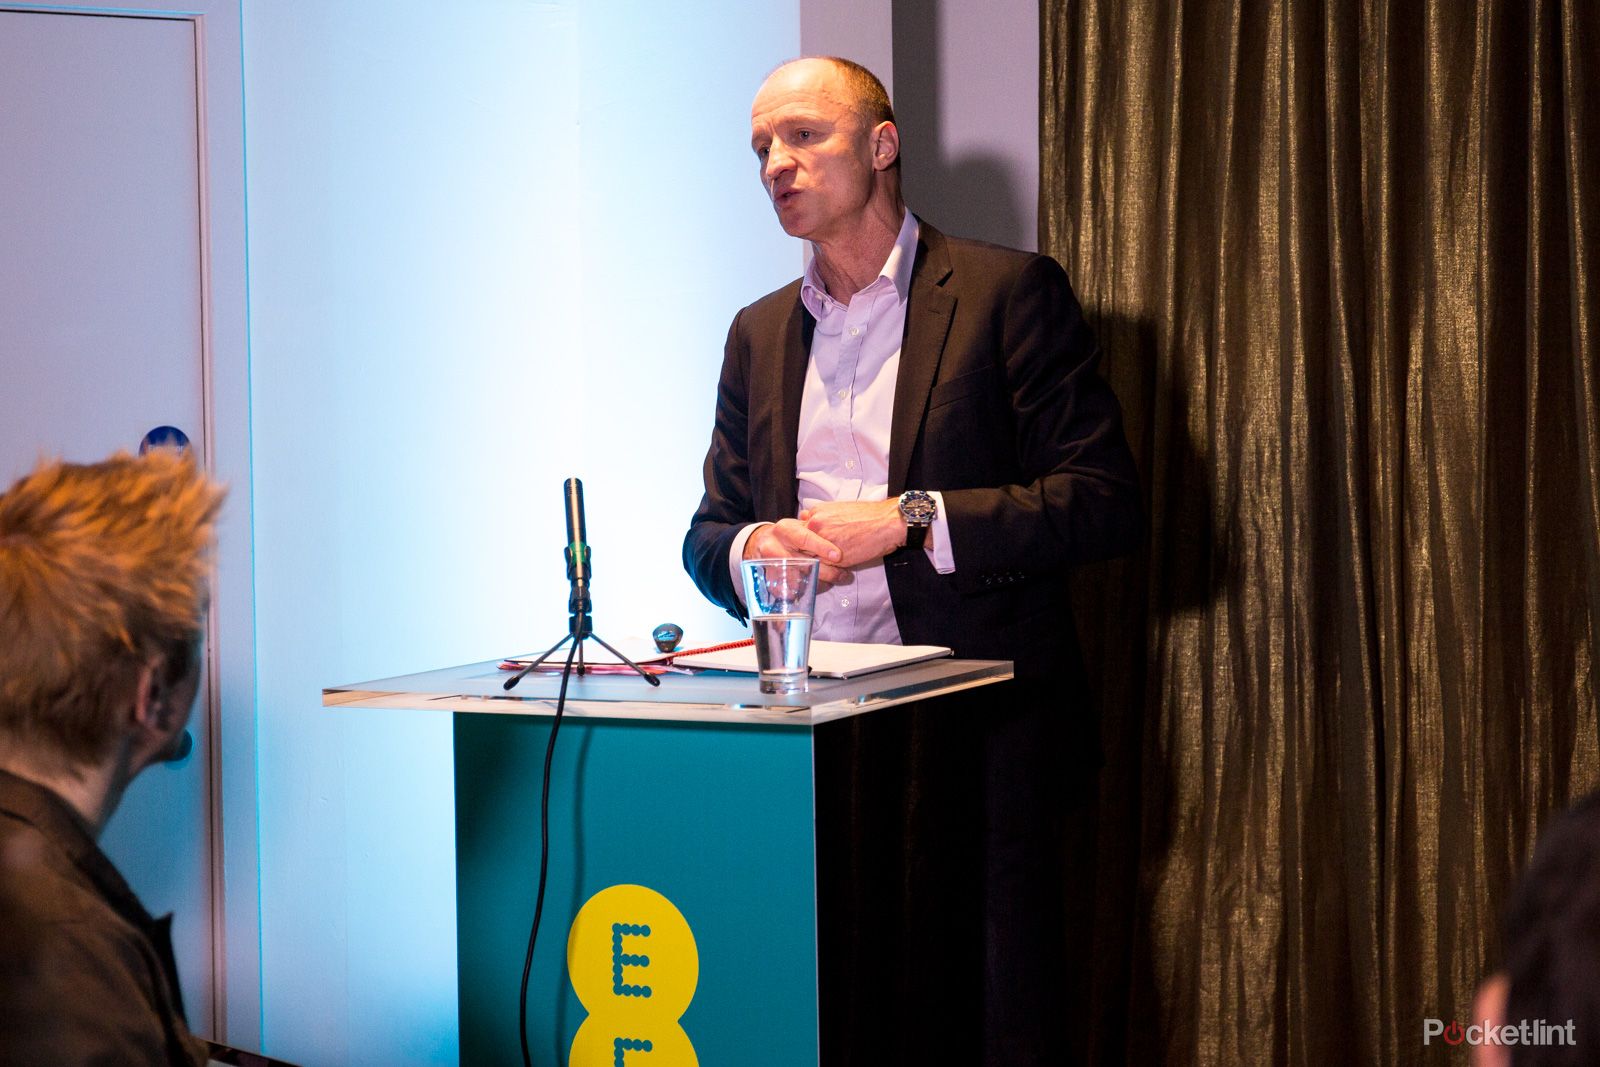 ee launches own 4g connected 4gee action cam to share live footage over network image 2